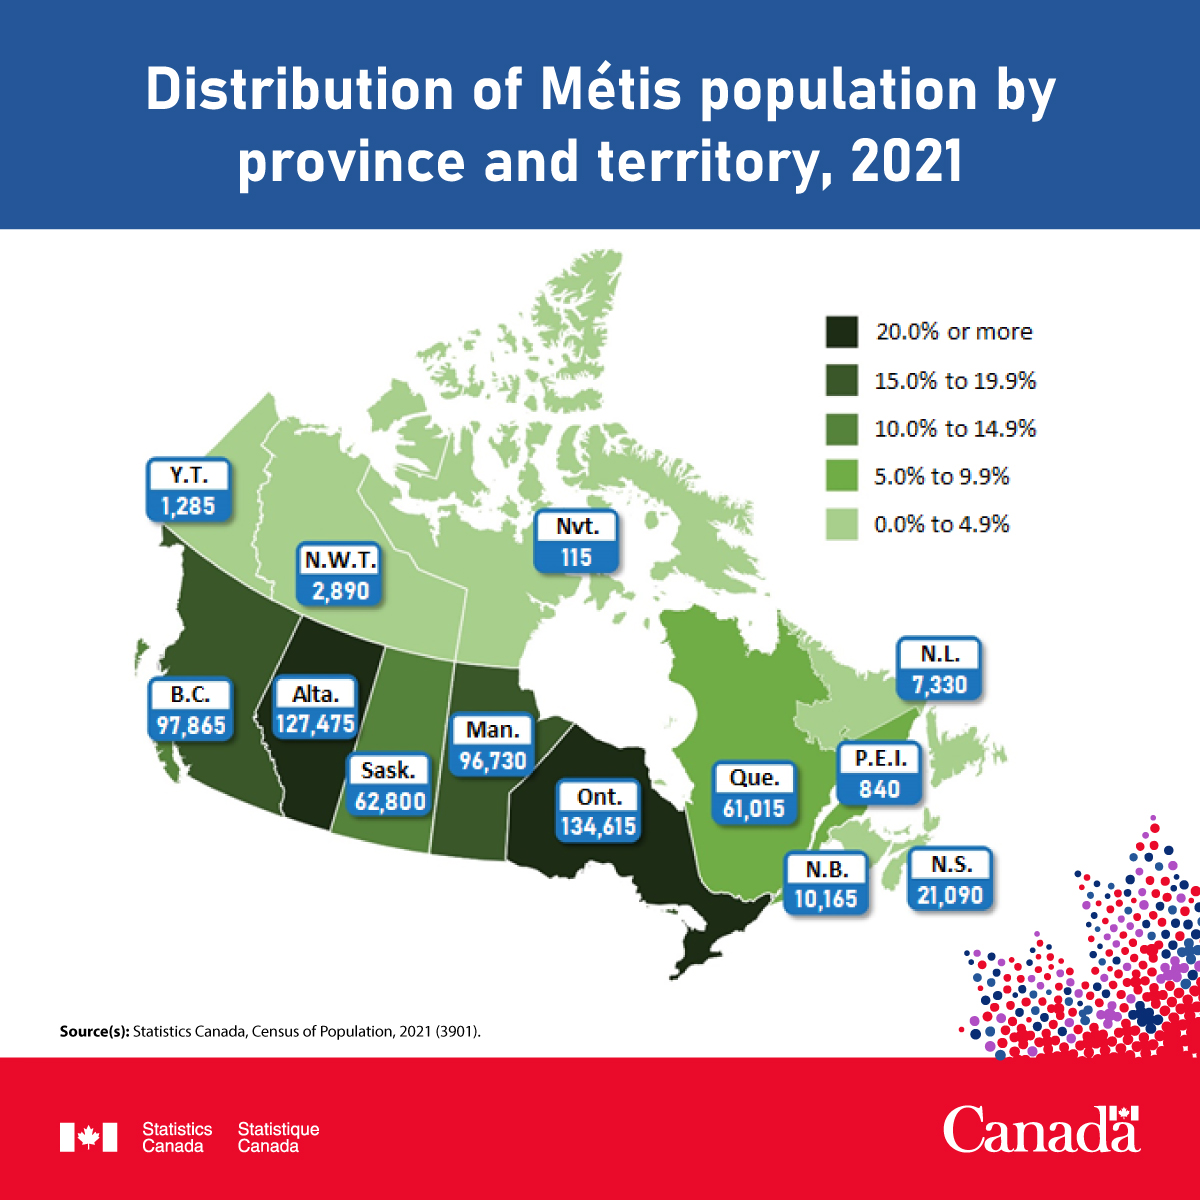 Post 5 image - Distribution of Métis population by provinces and territories, 2021